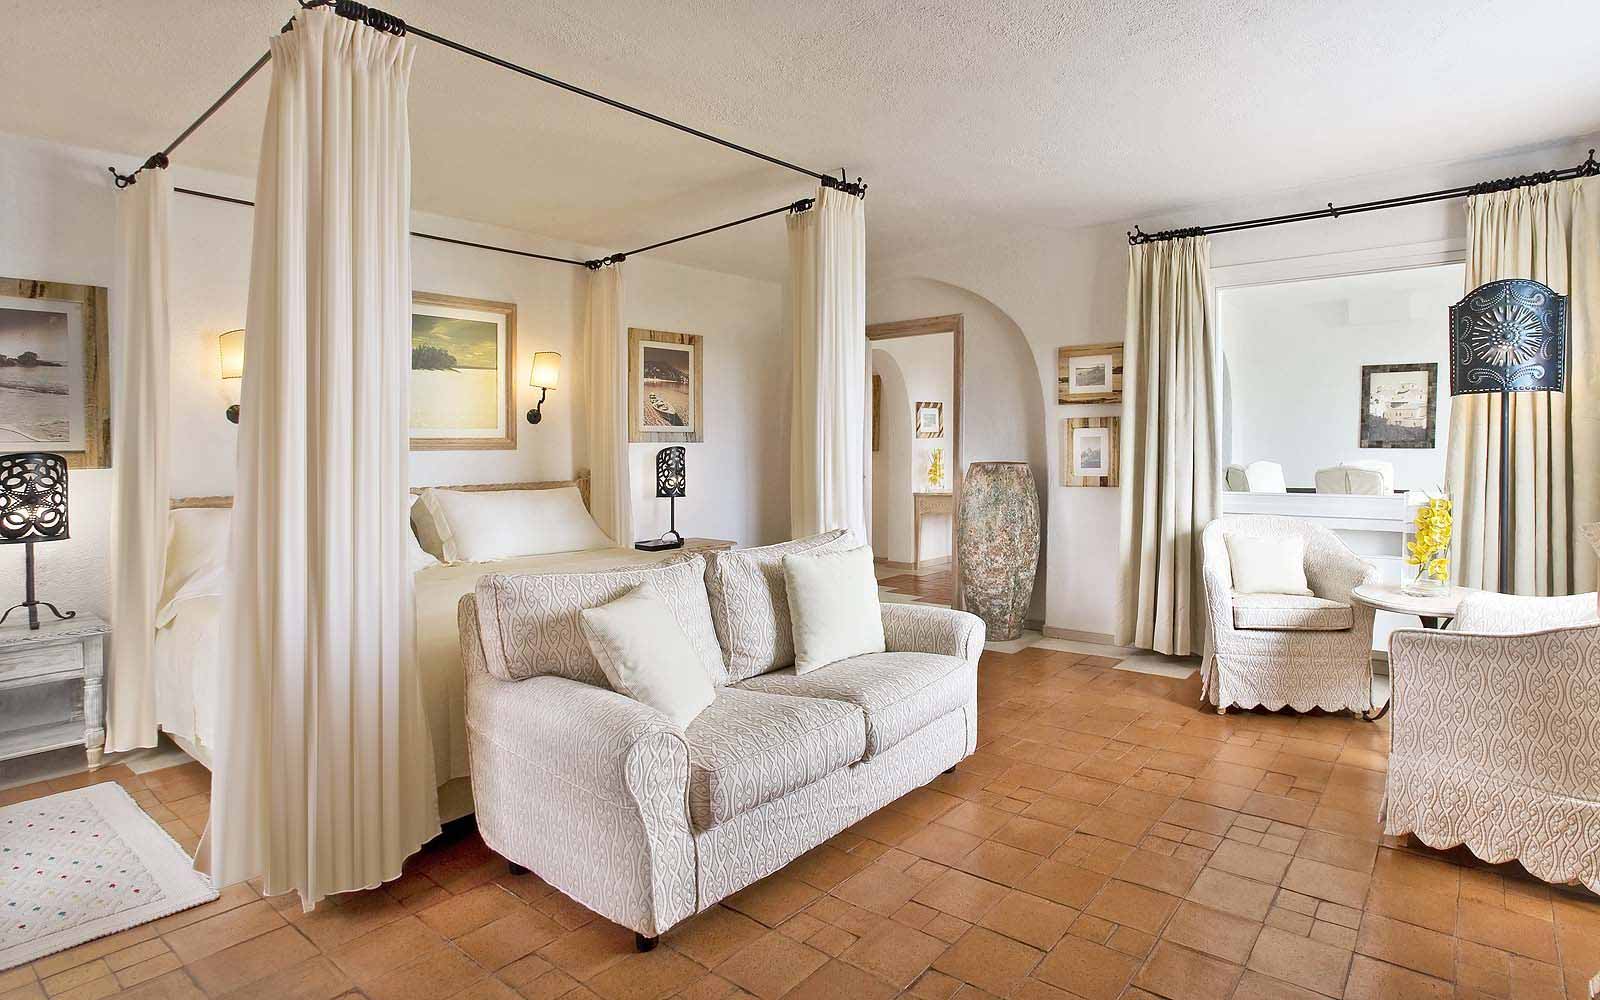 A Royal Suite's bedroom at the Hotel Romazzino